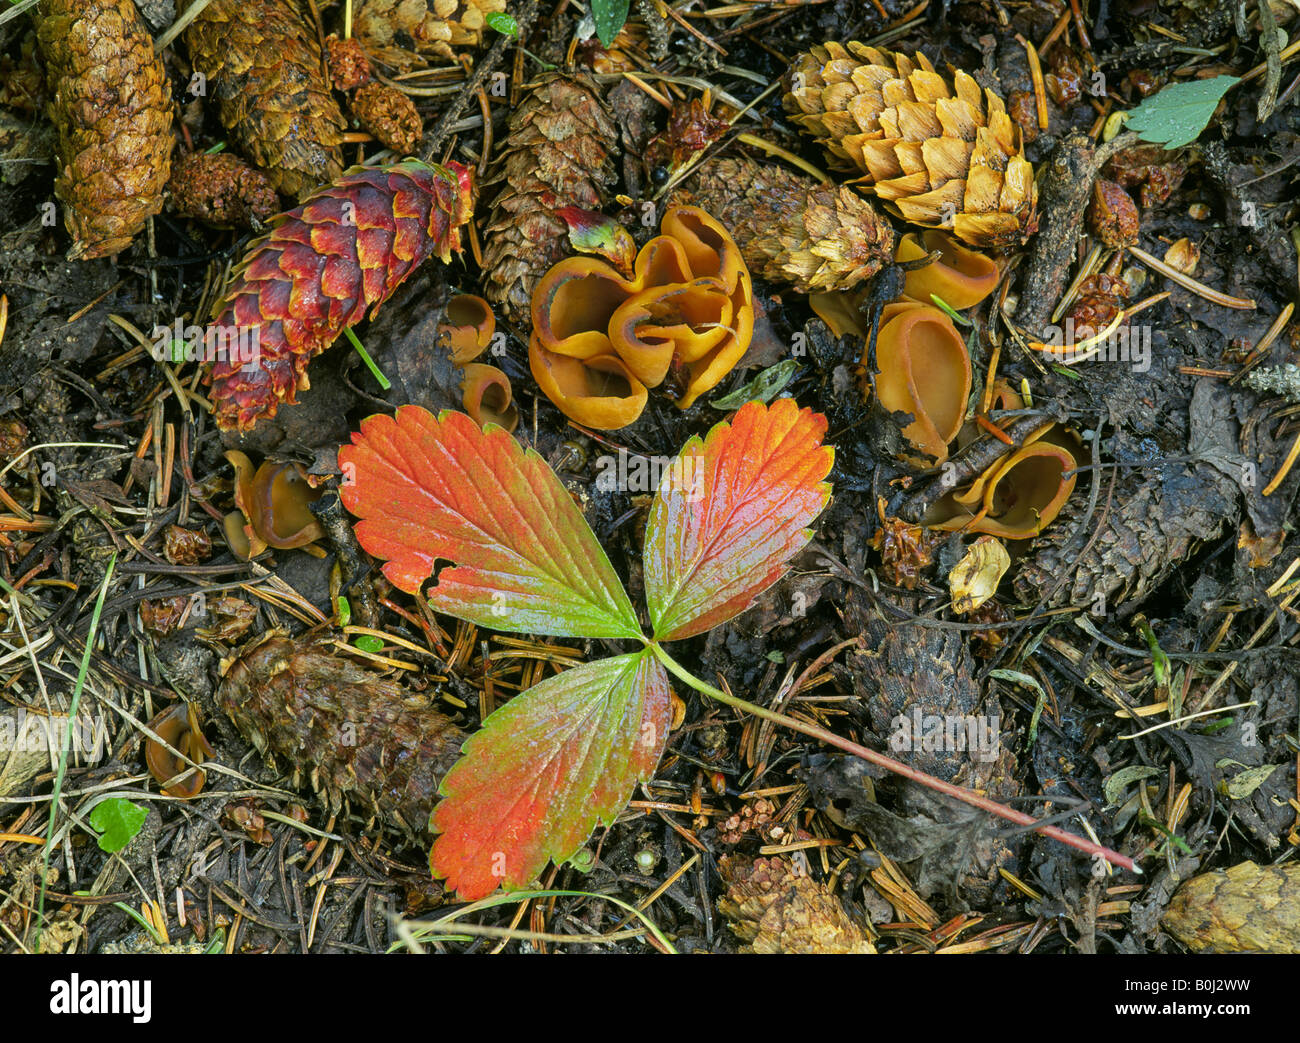 Spruce seed cones a wild strawberry leaf and several small mushrooms in a forest in the Pecos Wilderness area Stock Photo